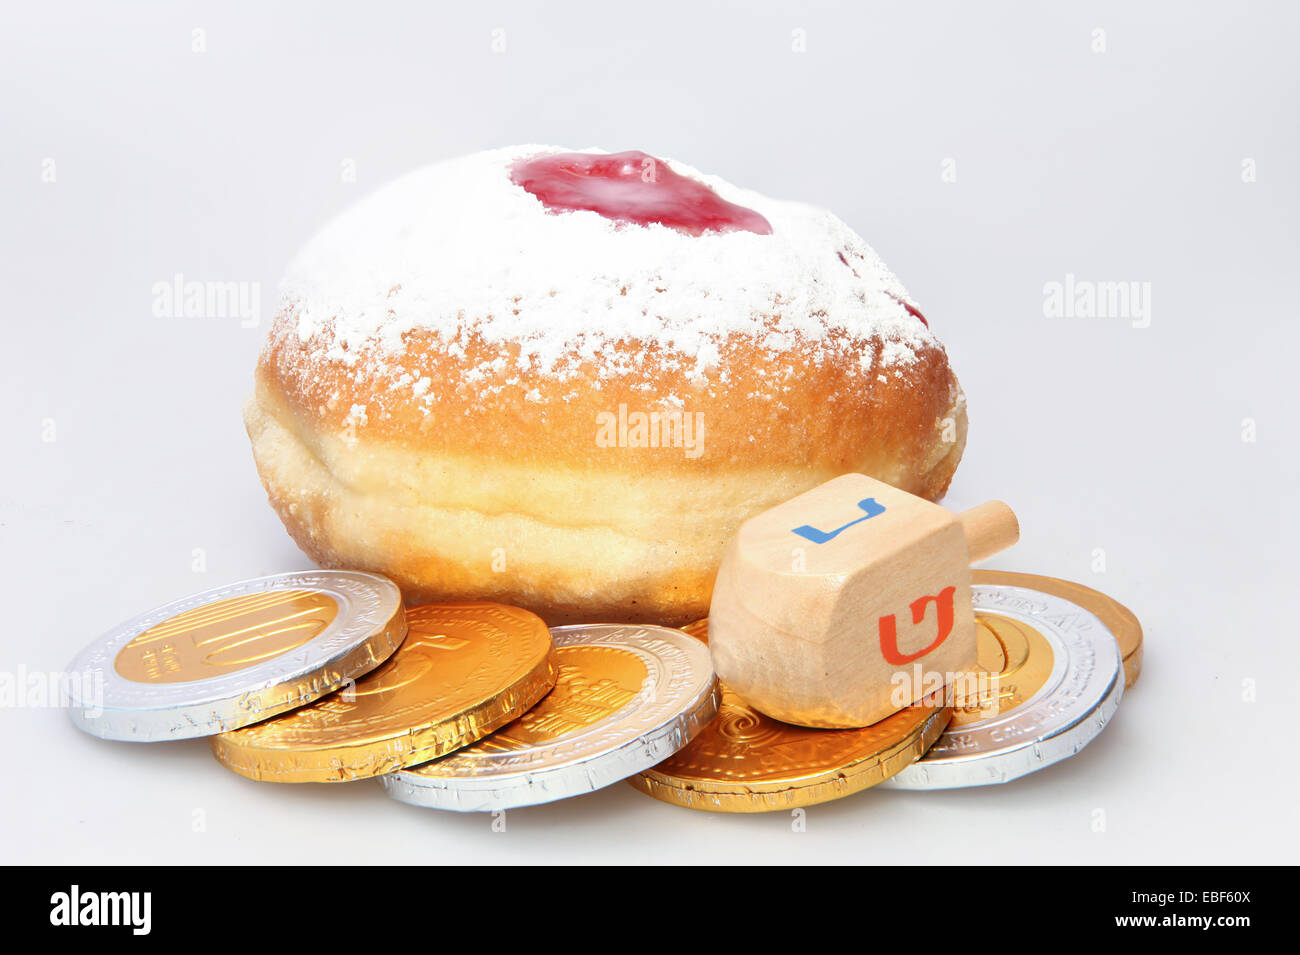 Hanukkah doughnut and spinning top - Traditional jewish holiday food and toy. Stock Photo